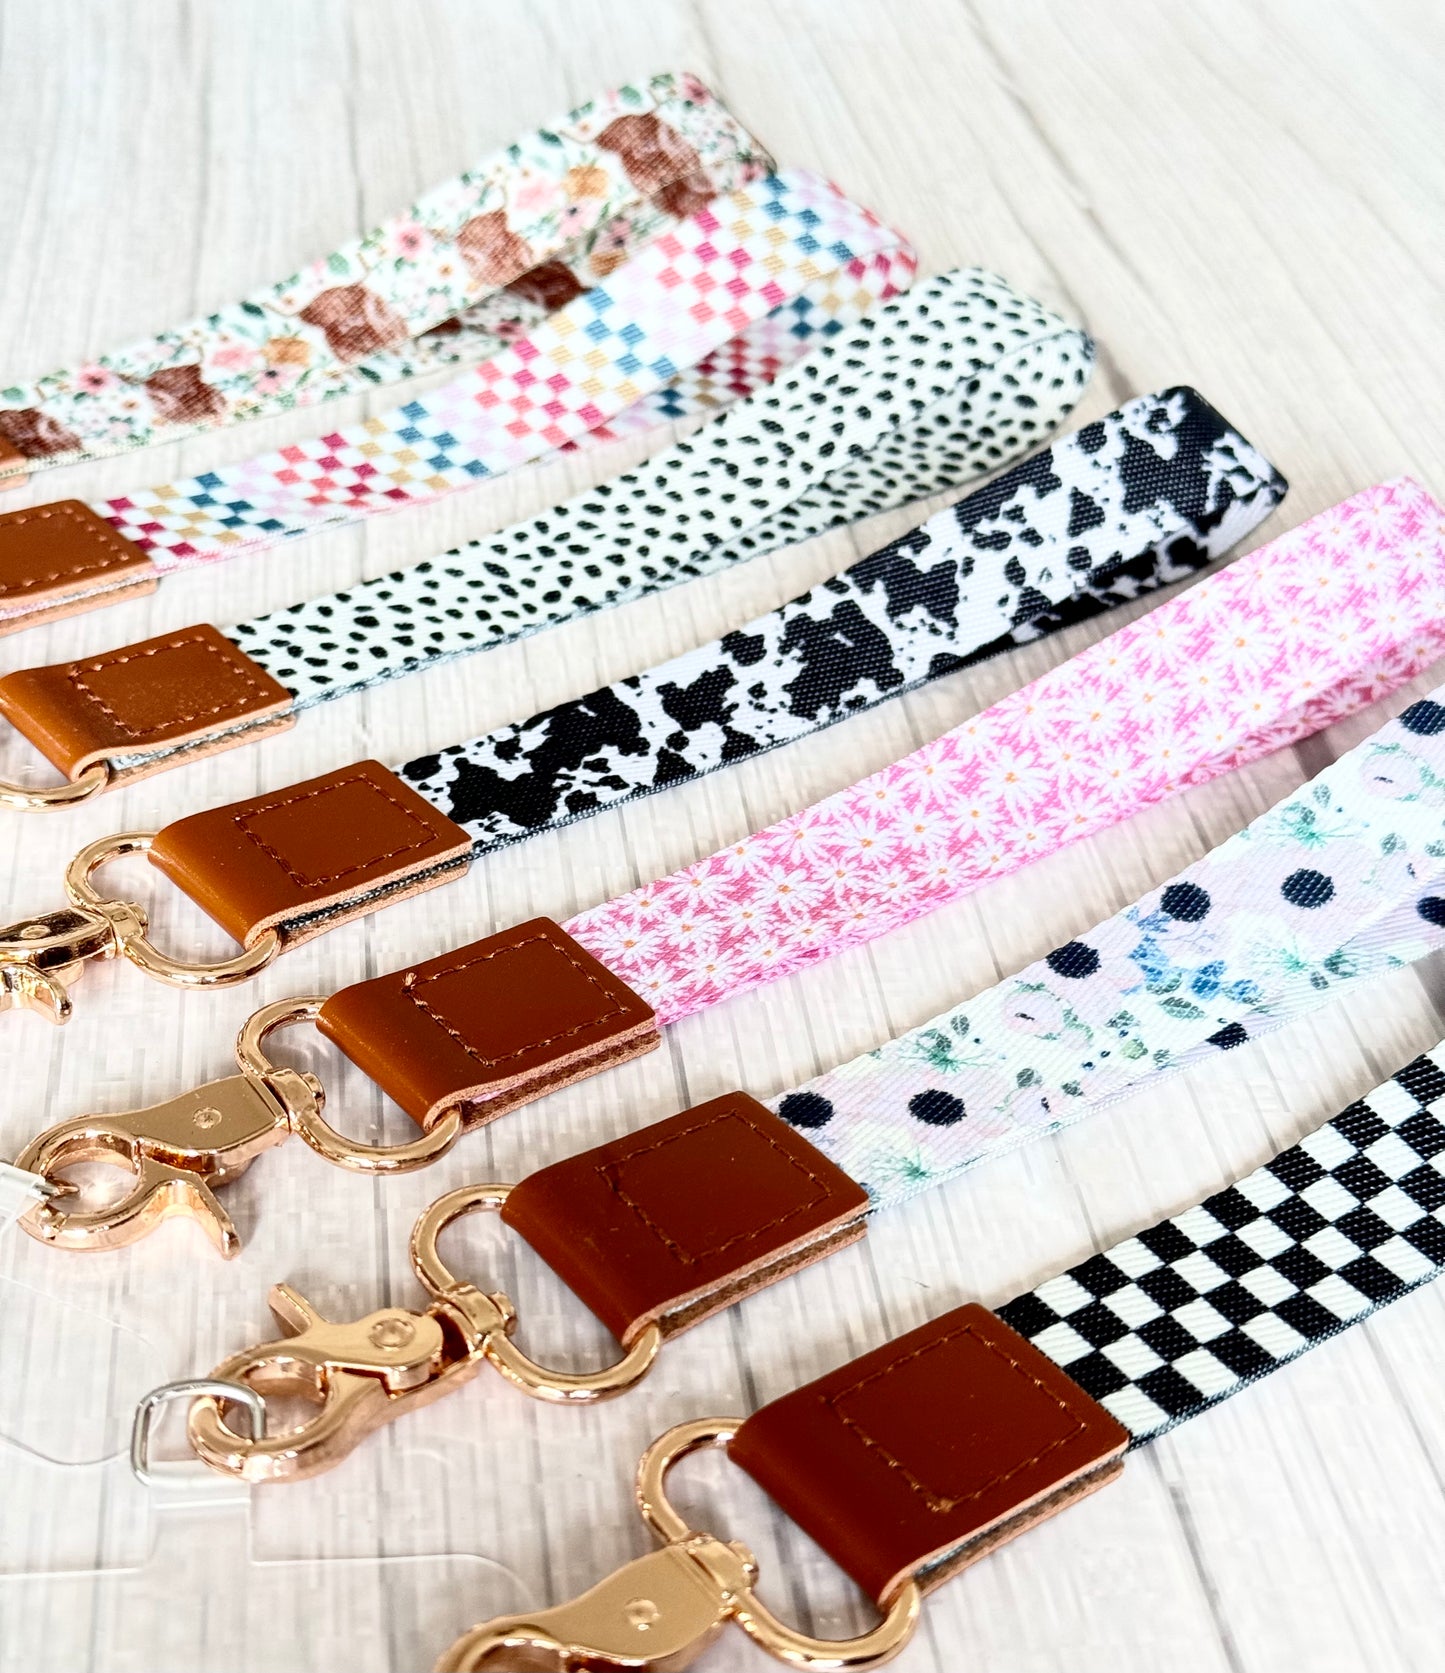 Phone Wrist Strap Keychain with Tether Tab - COW PRINT